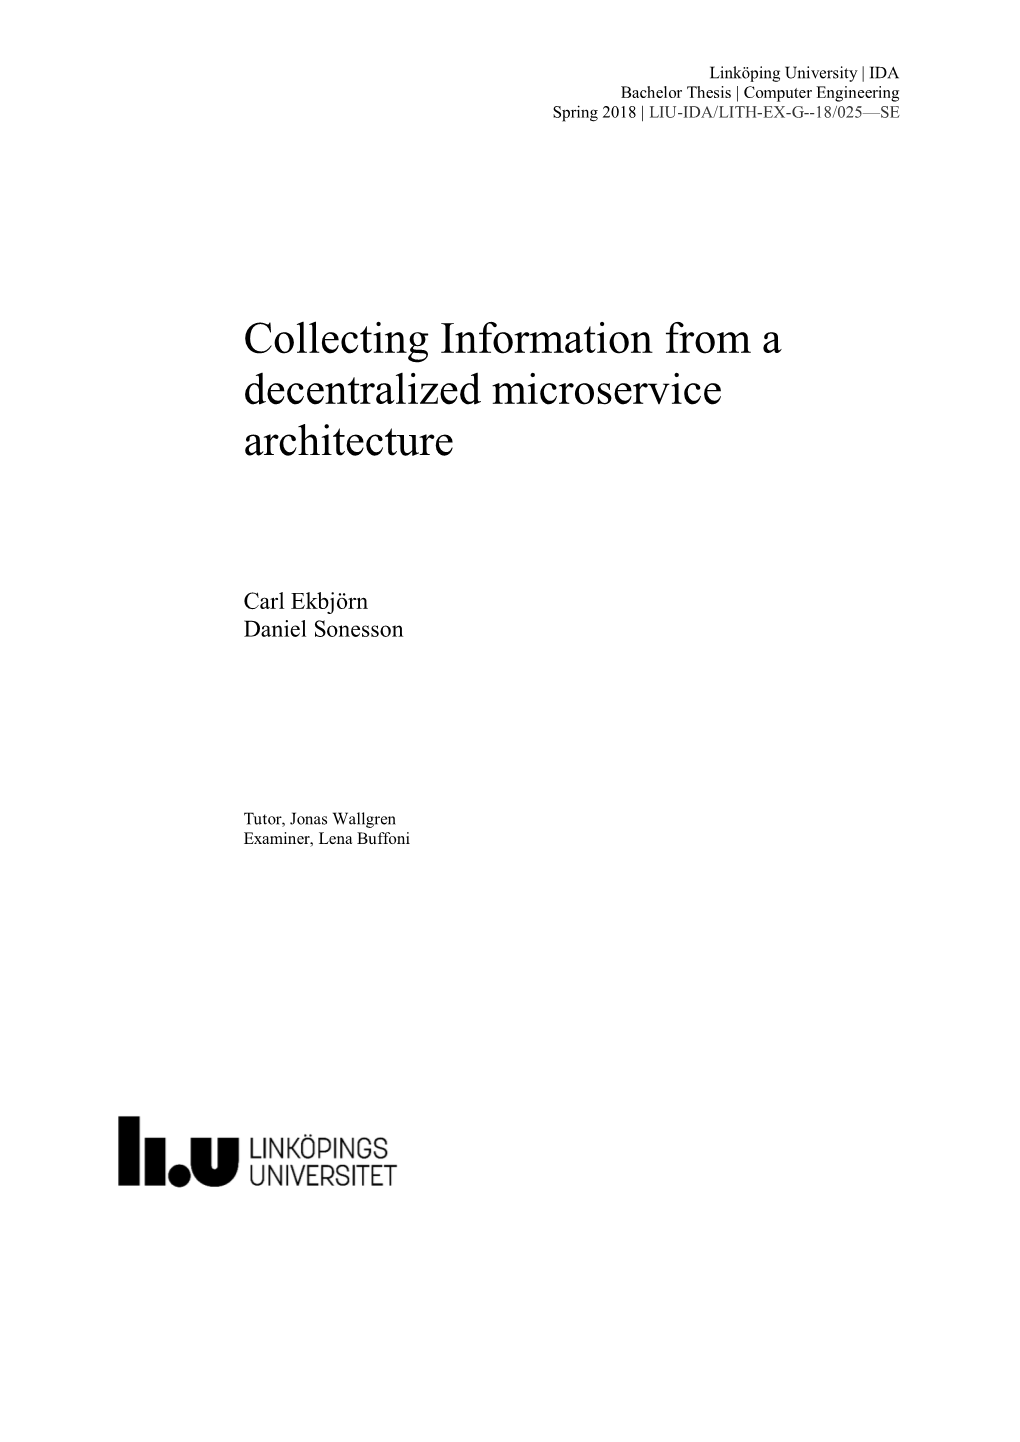 Collecting Information from a Decentralized Microservice Architecture